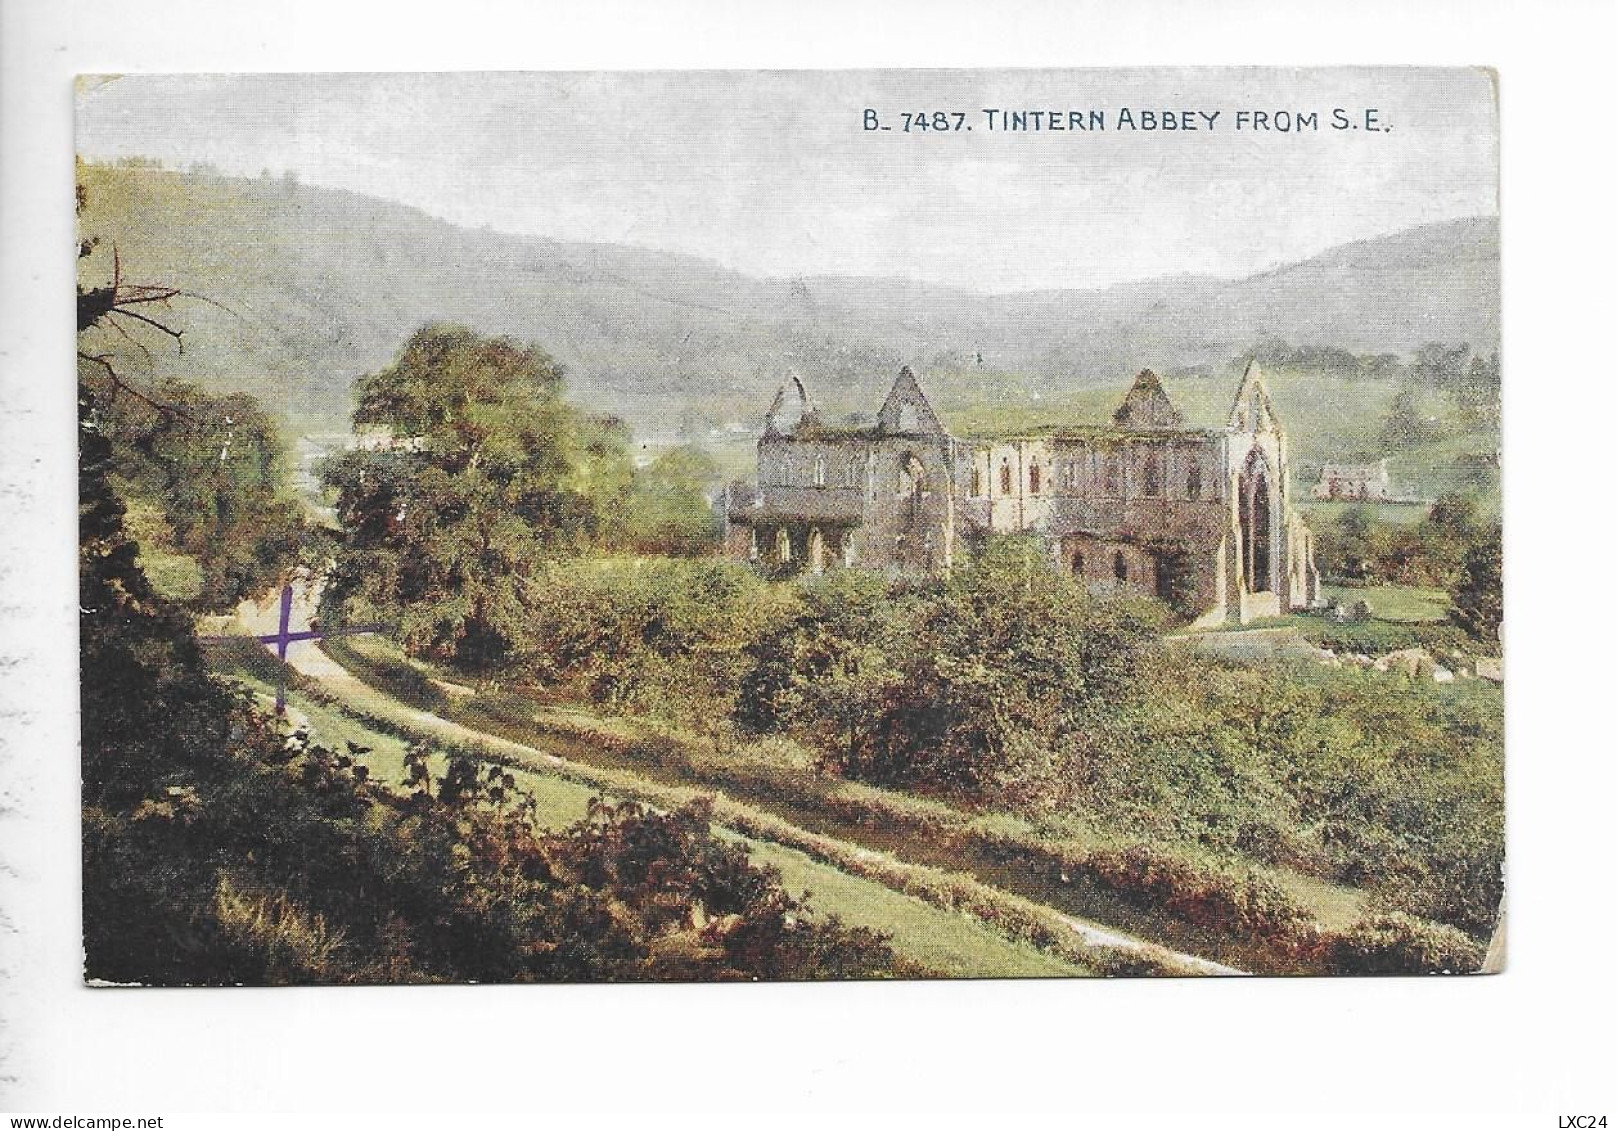 TINTERN ABBEY FROM S.E. - Monmouthshire